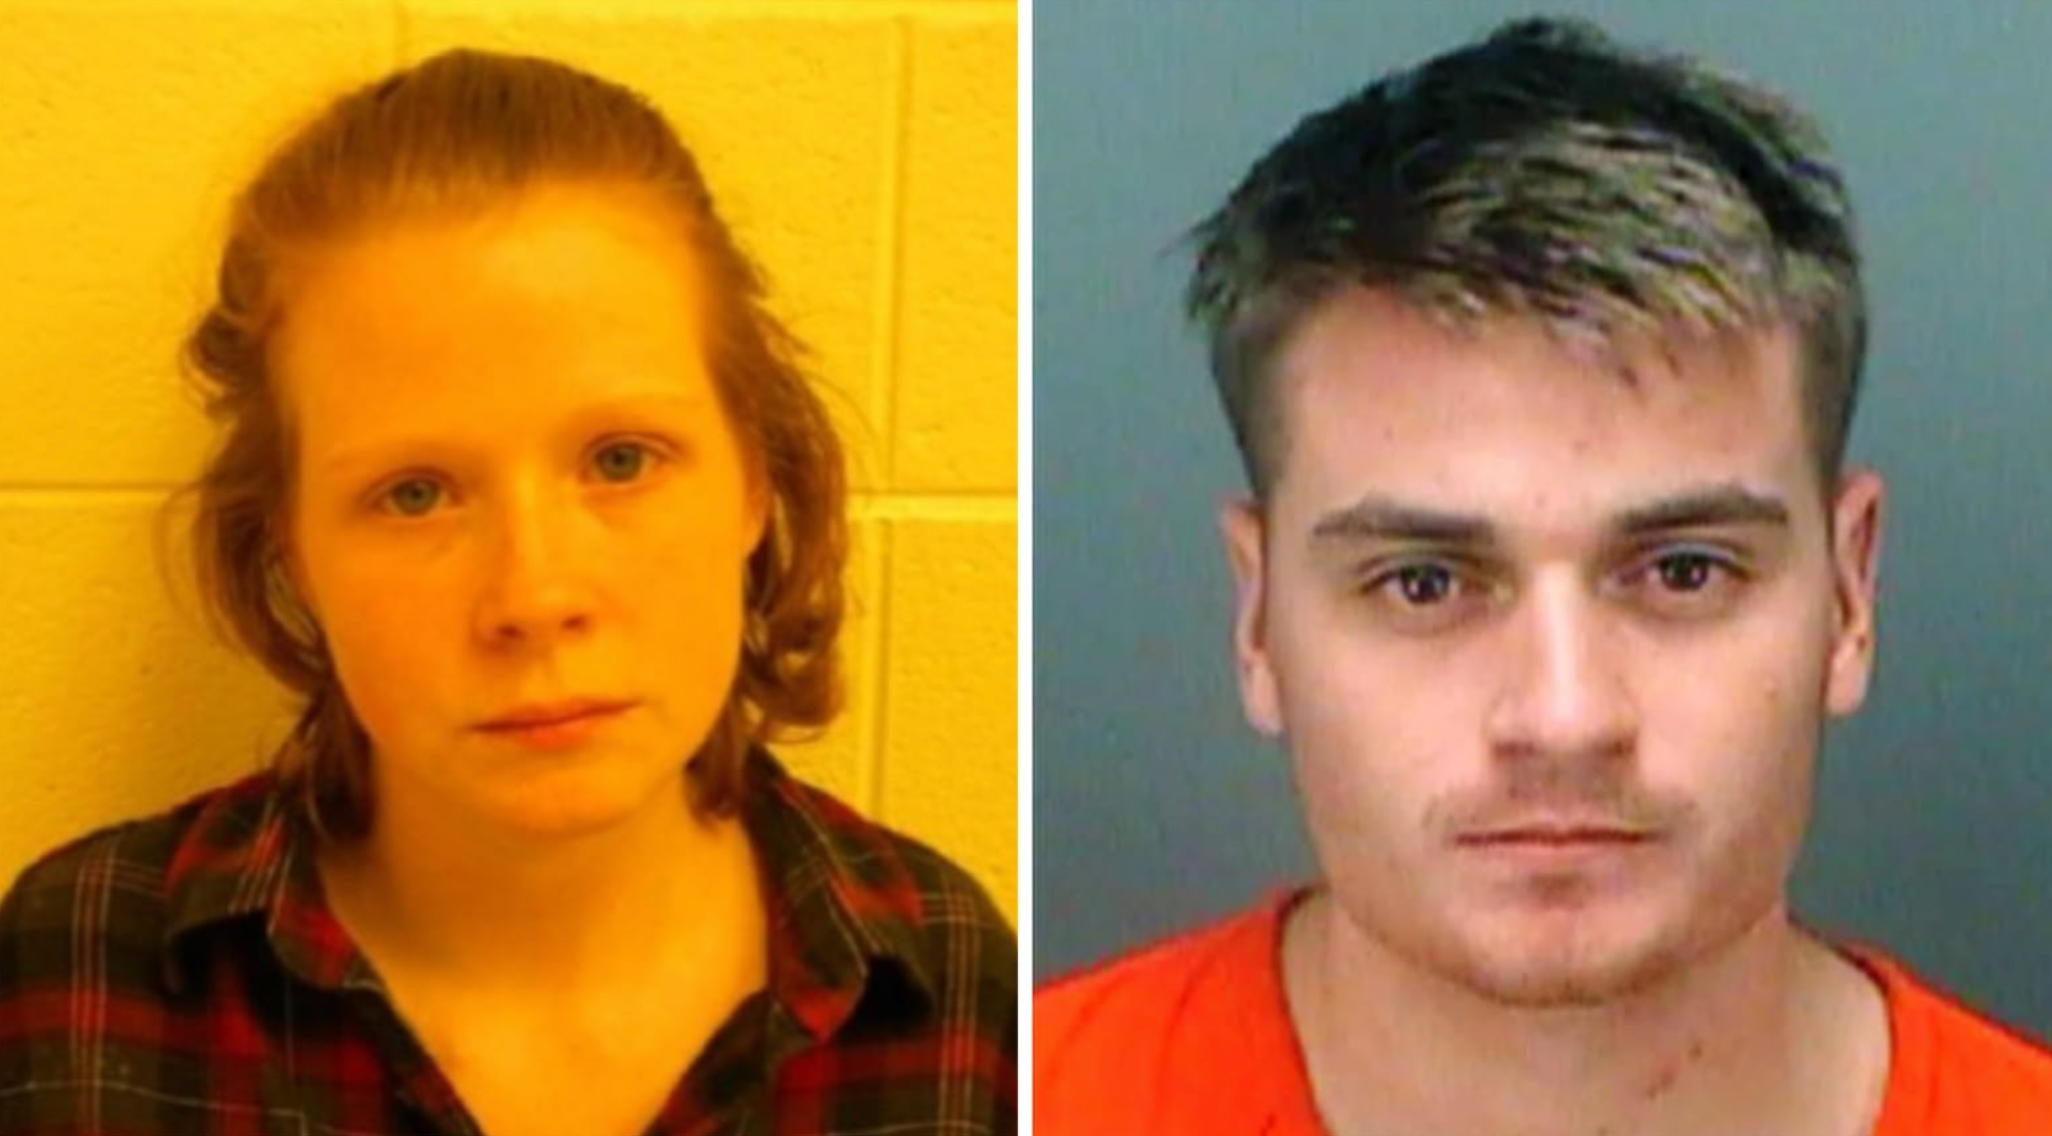 Sarah Clendaniel and Brandon Russell, the founder of the neo-Nazi group Atomwaffen, in mug shots